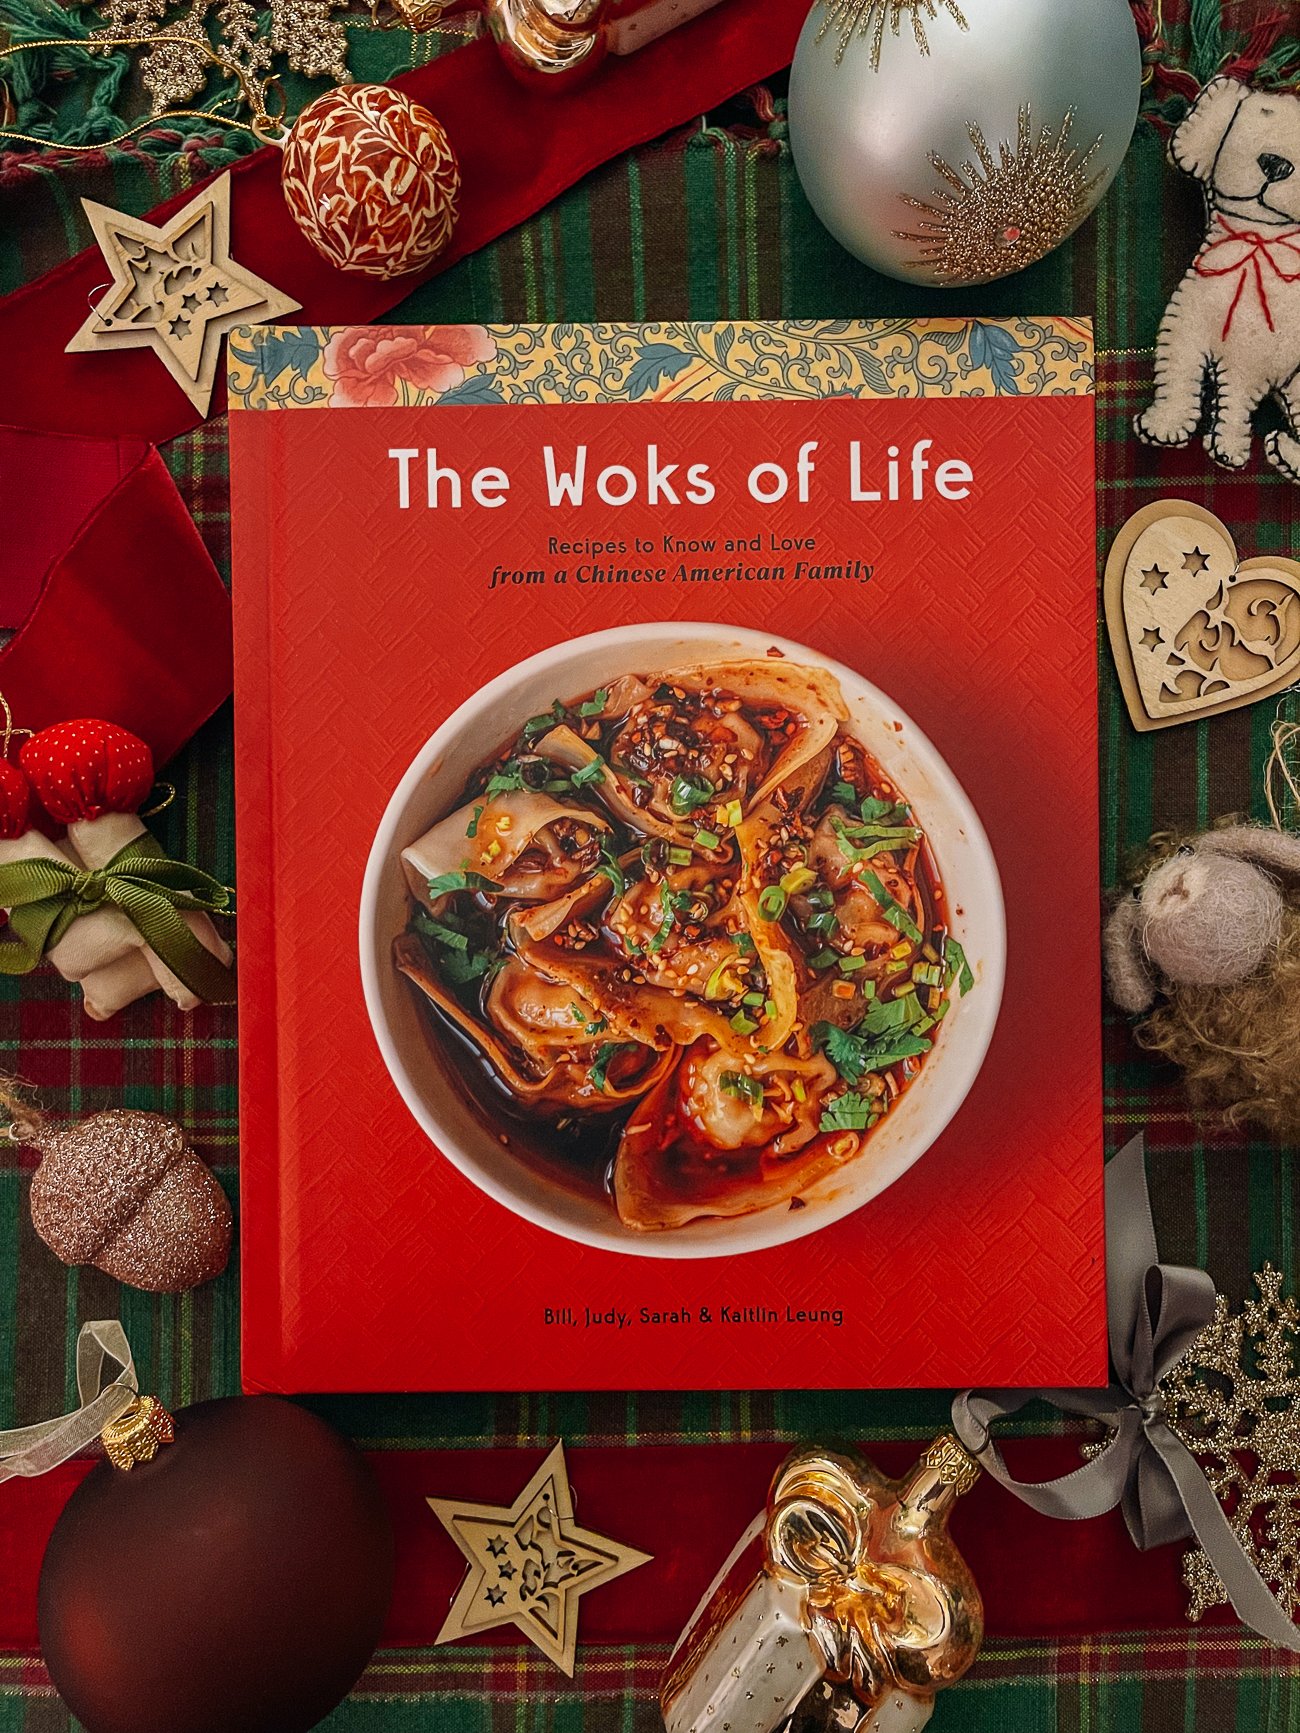 The Woks of Life Cookbook with cozy Christmas ornaments around it